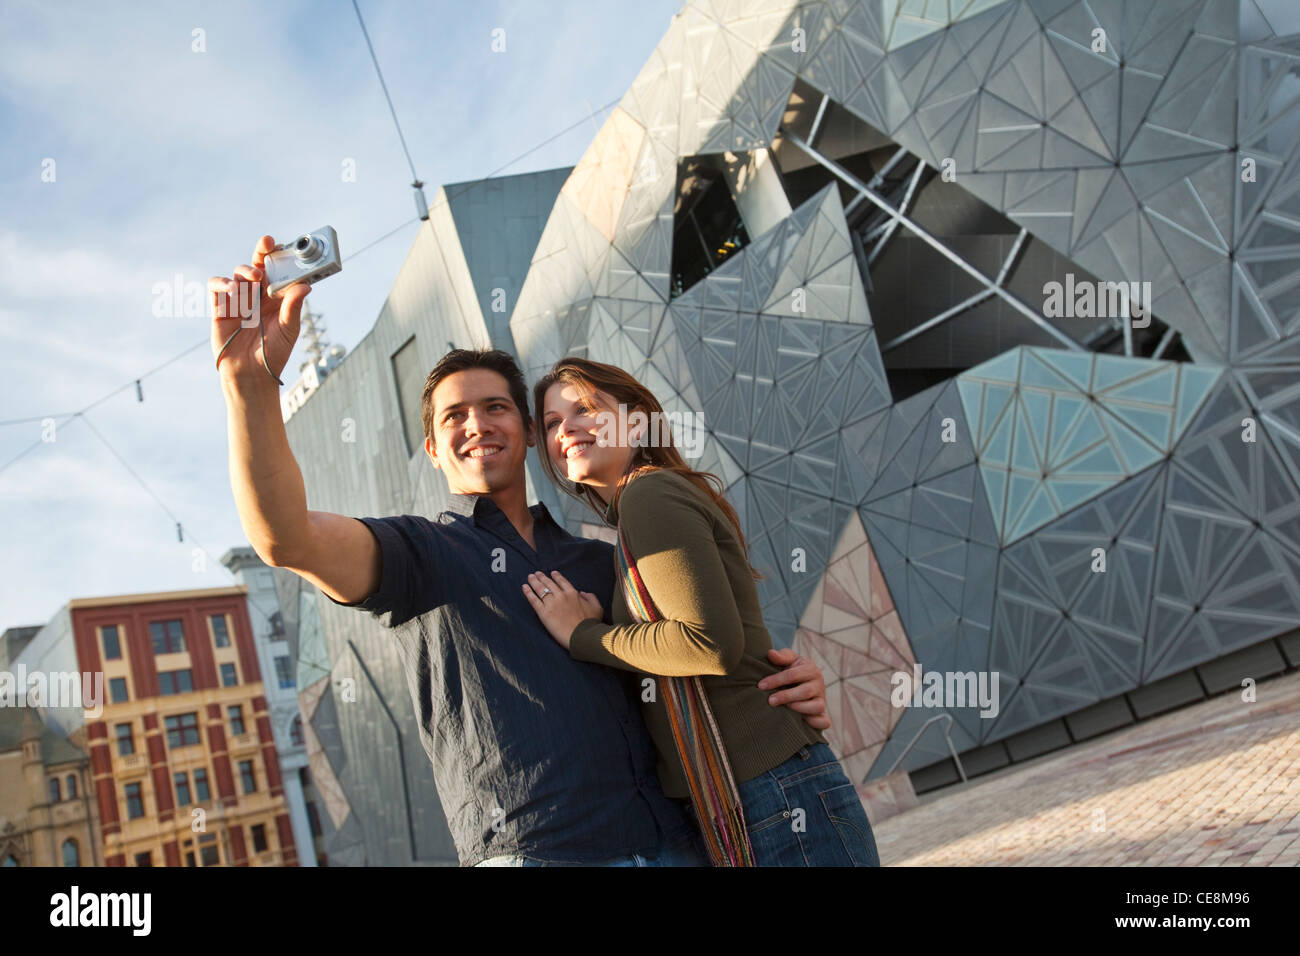 Couple sightseeing in city, taking a picture. Federation Square, Melbourne, Victoria, Australia Stock Photo